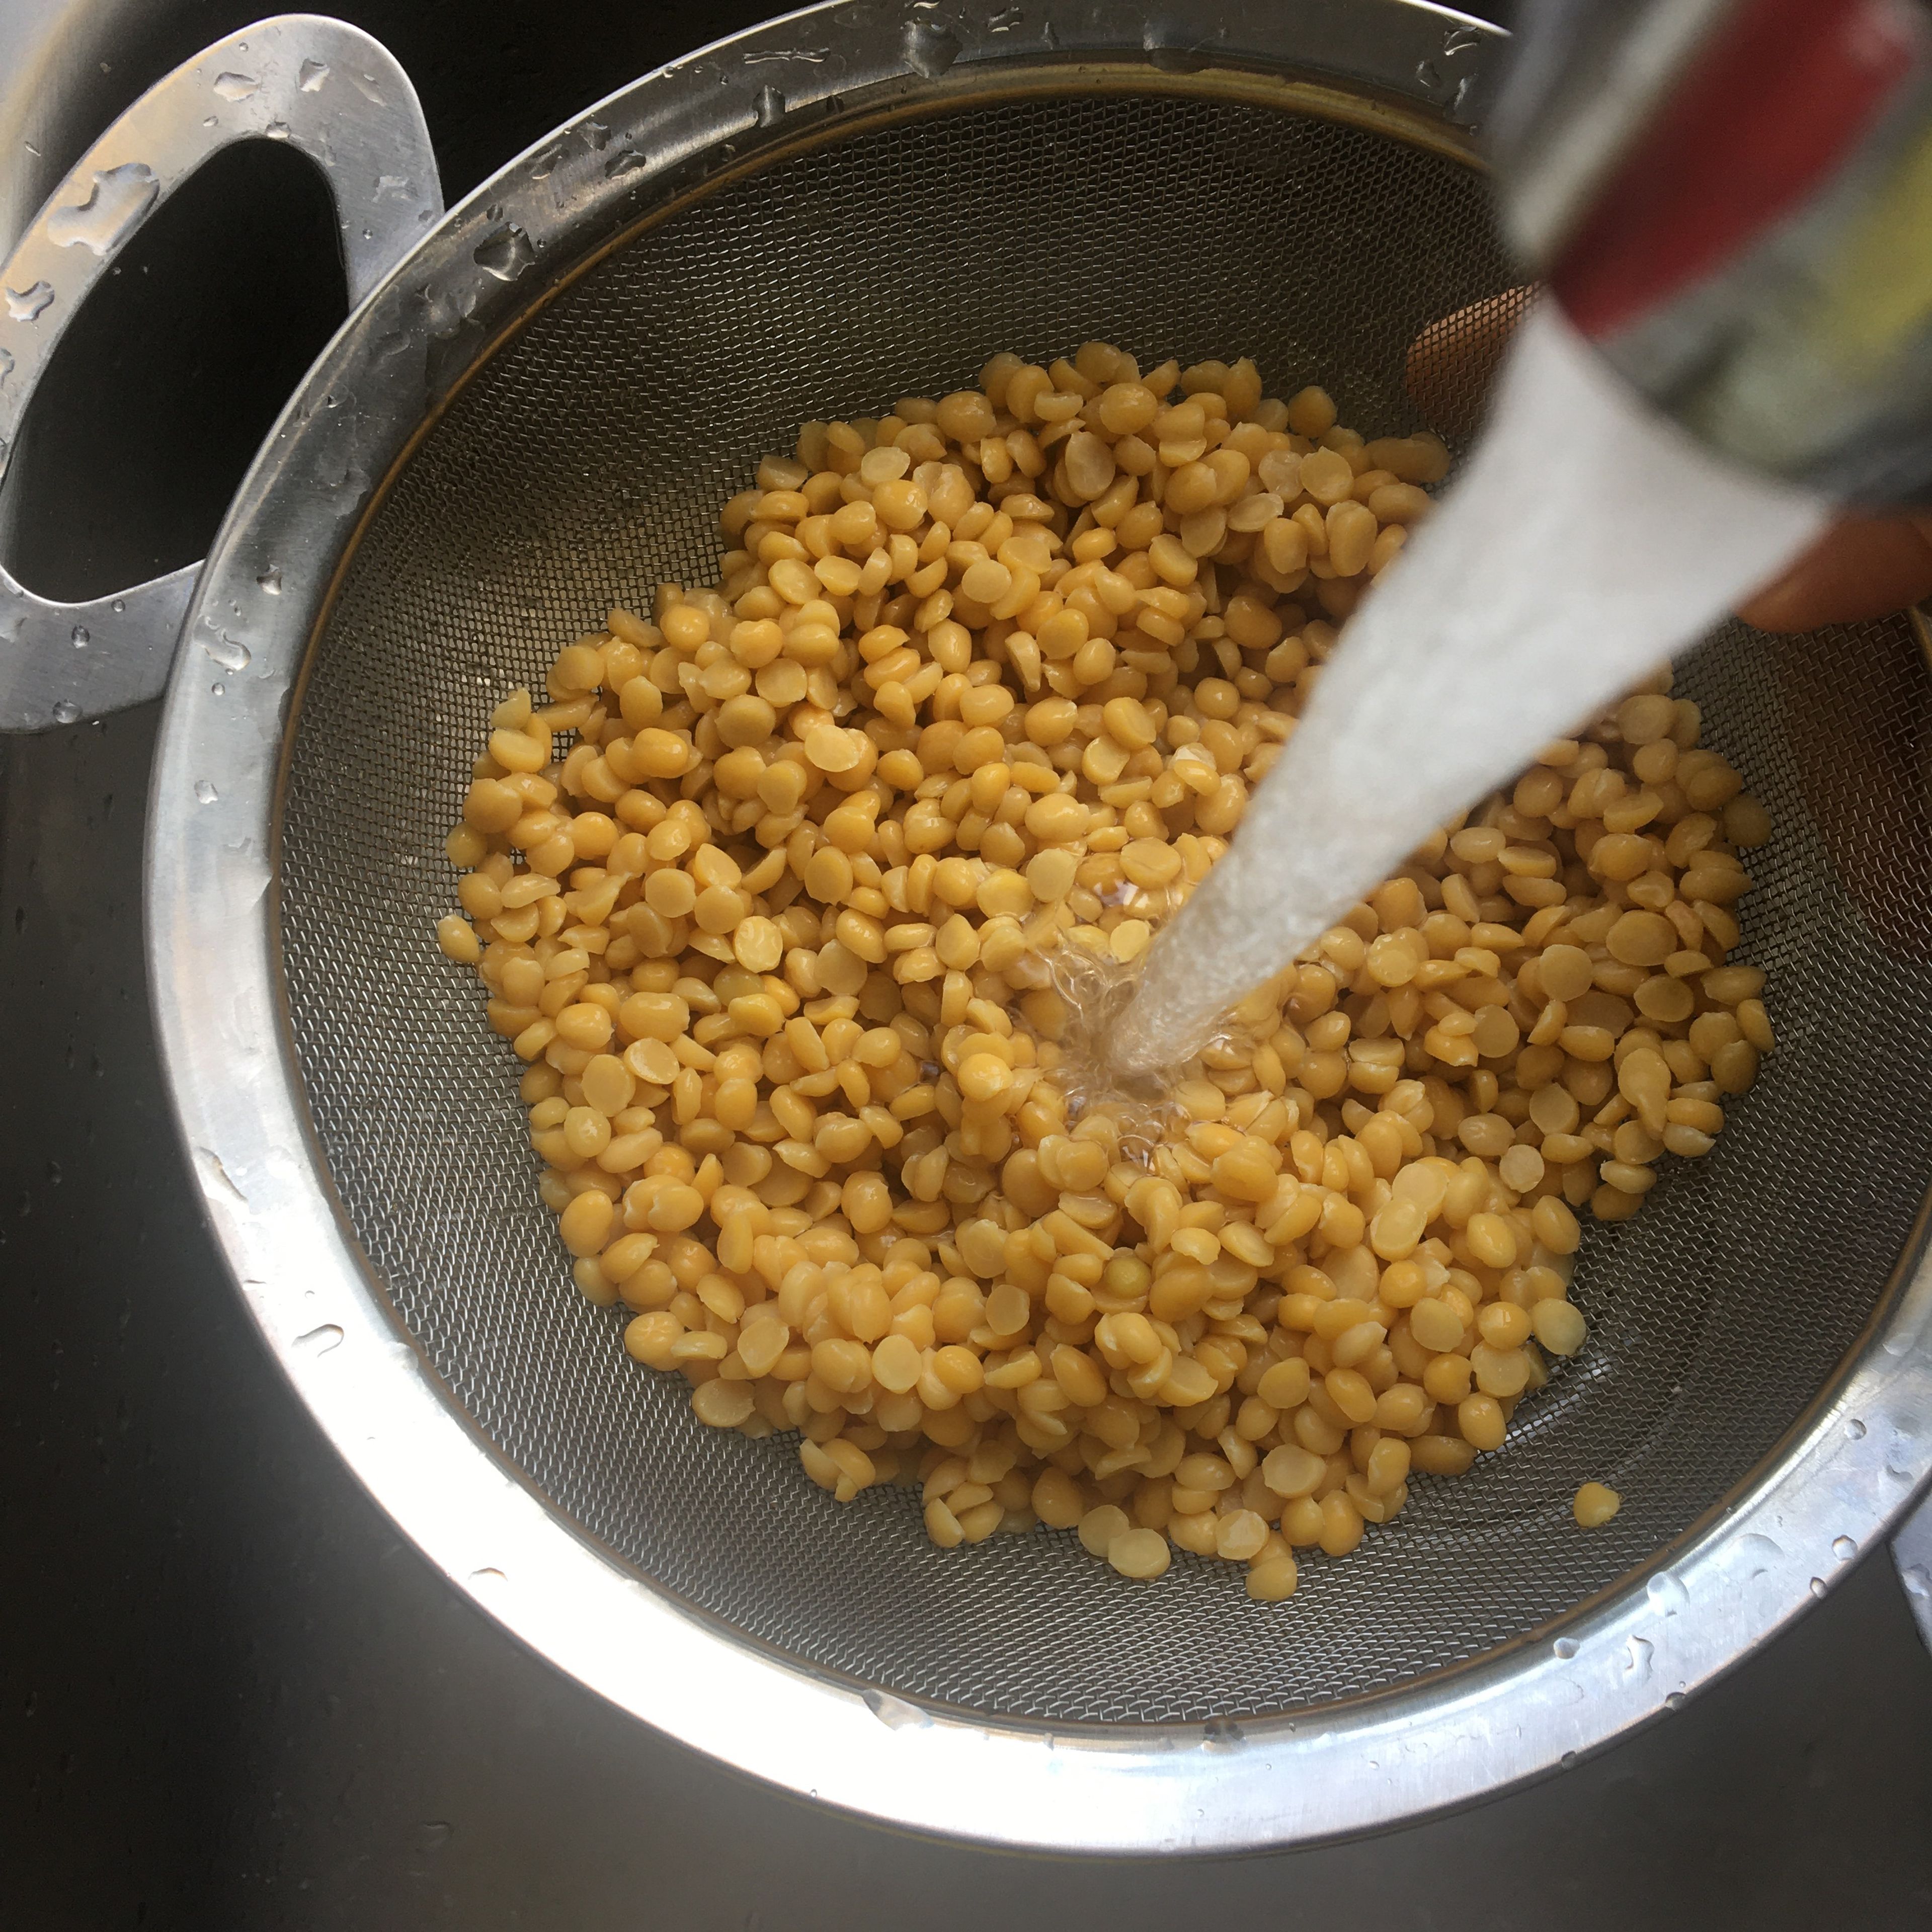 Wash the yellow split peas and soya chunks separately, then let them soak for about 30 min. or more. Cook in two appropriate pots, letting the peas cooked completely but change the soya water once or twice to reduce its unpleasant odor.